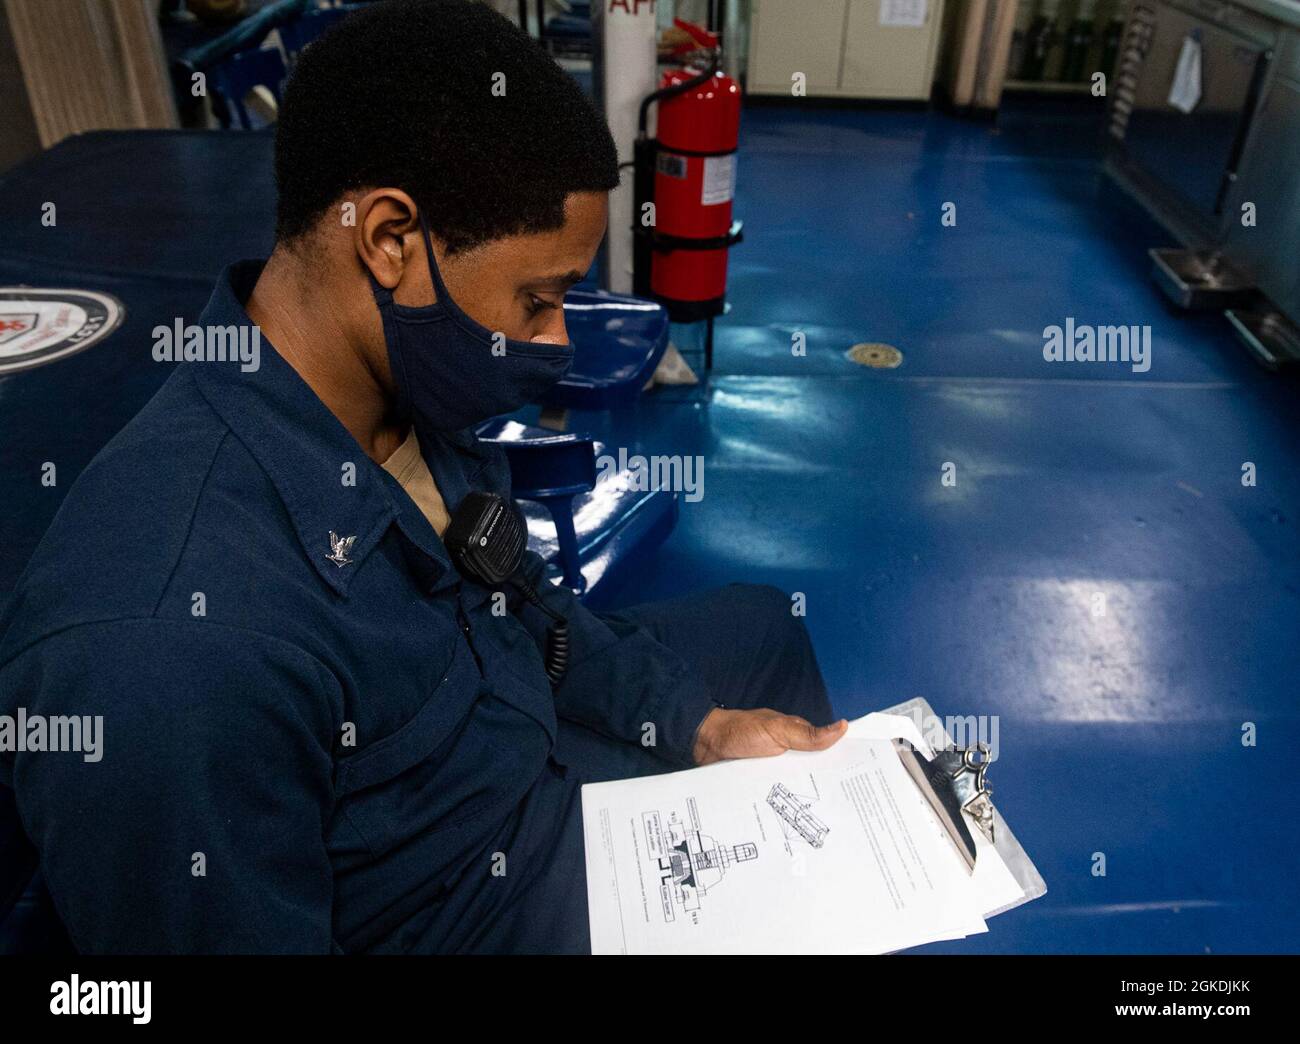 210322-N-RC007-1003 RODMAN, PANAMA (March 22, 2021) Engineman 3rd Class Elijah Lamb from Dallas, Texas, reviews a maintenance requirement card aboard the Freedom-variant littoral combat ship USS Freedom (LCS 1) during a brief stop for fuel and provisions in Rodman, Panama, March 22, 2021. Freedom is deployed to the U.S. 4th Fleet area of operations to support Joint Interagency Task Force South's mission, which includes counter-illicit drug trafficking missions in the Caribbean and Eastern Pacific. Stock Photo